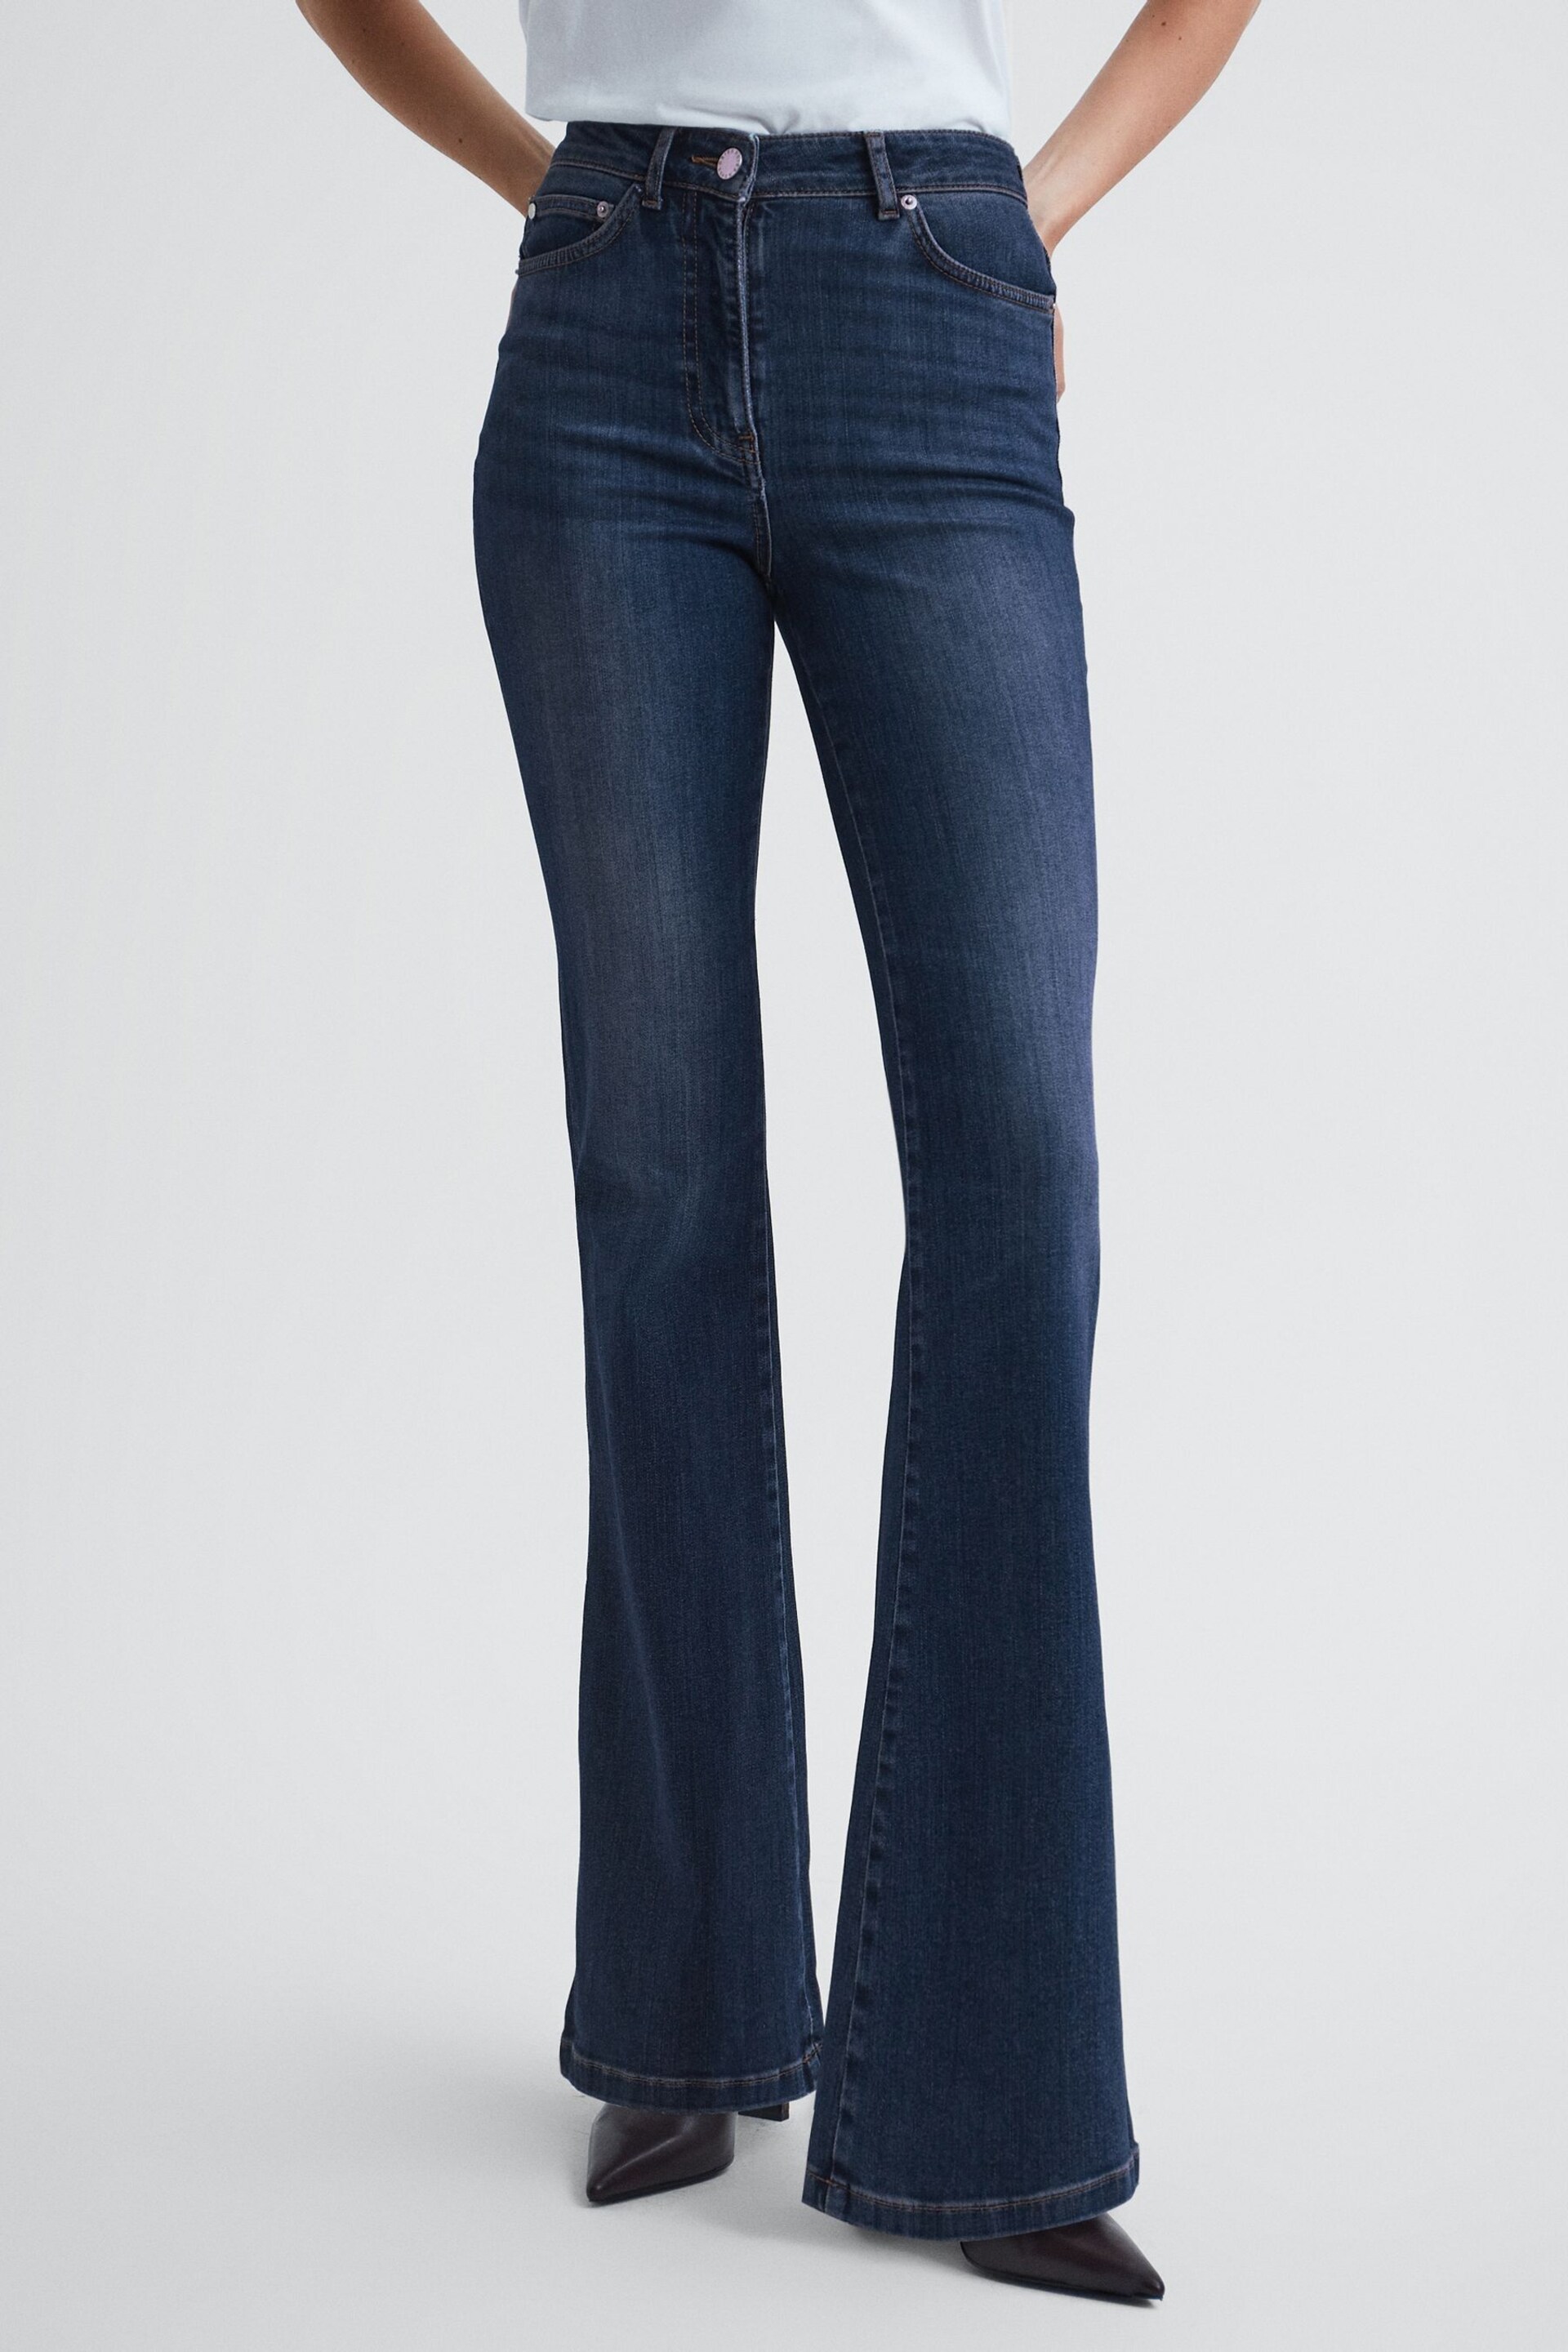 Reiss Mid Blue Beau Petite High Rise Skinny Flared Jeans - Image 3 of 6